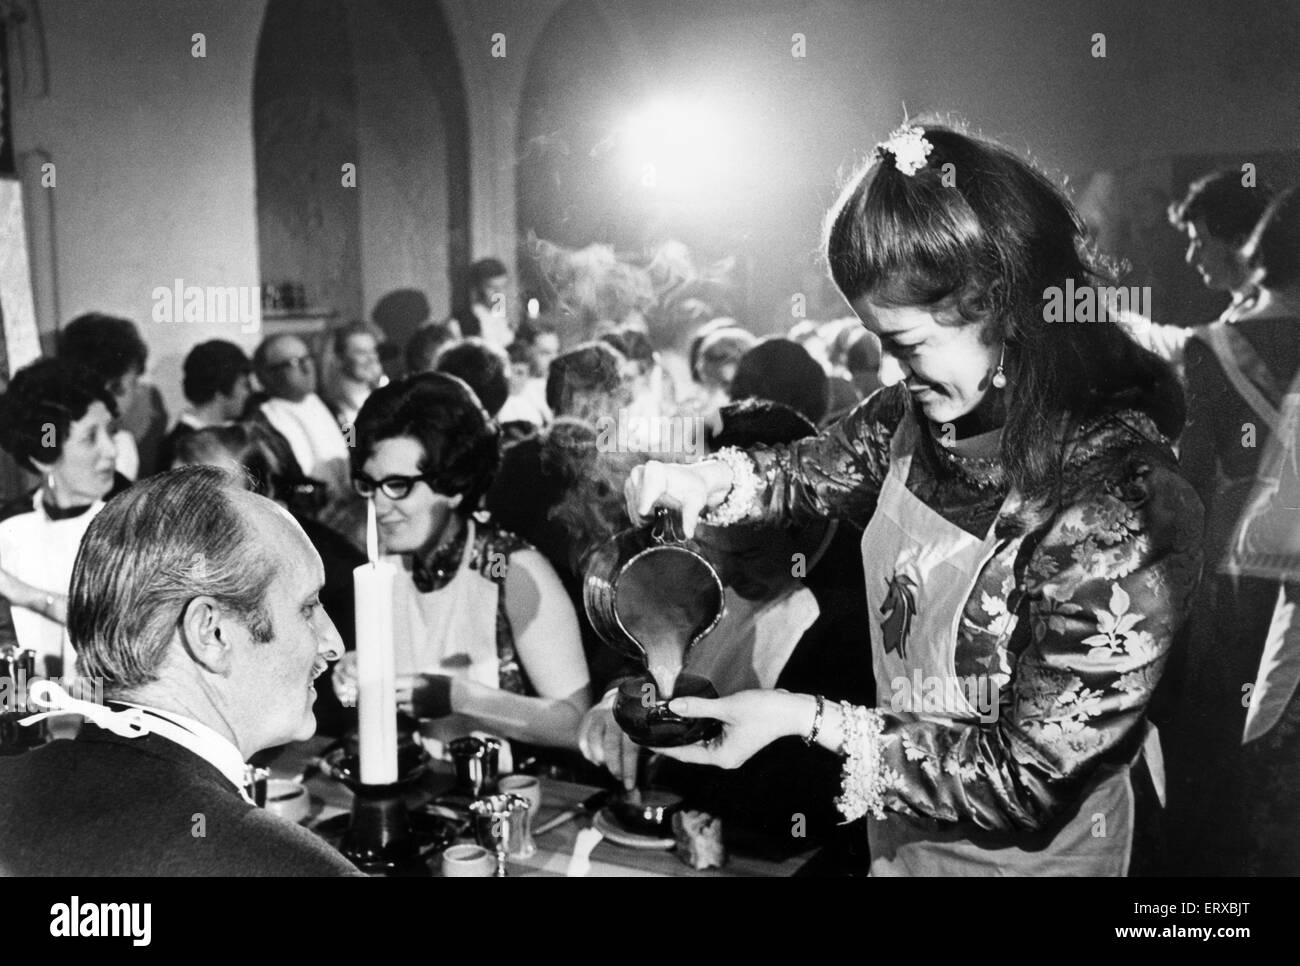 Caldicot Castle, Monmouth, southeast Wales, 19th March 1969. The opening night of the Mediaeval banquets at Caldicot Castle. Pictured, Gillian Johnson of Cwmbran, pouring soup for the guests at the table. Stock Photo